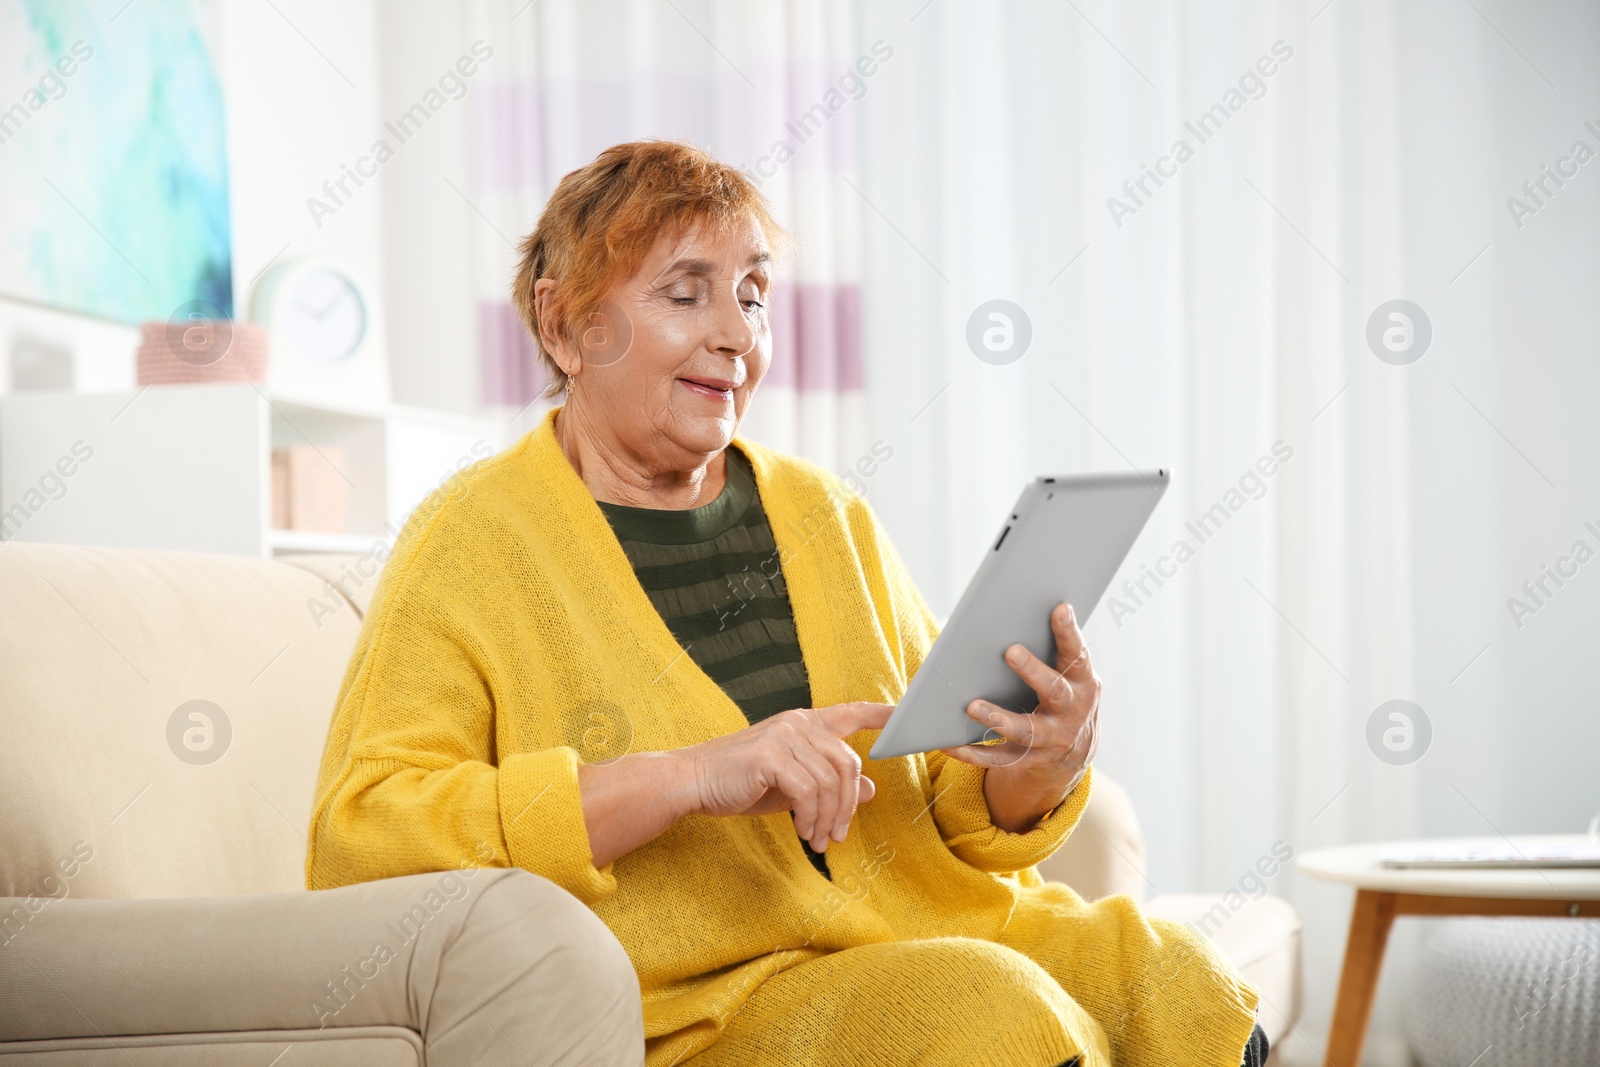 Photo of Elderly woman using tablet PC on sofa in living room